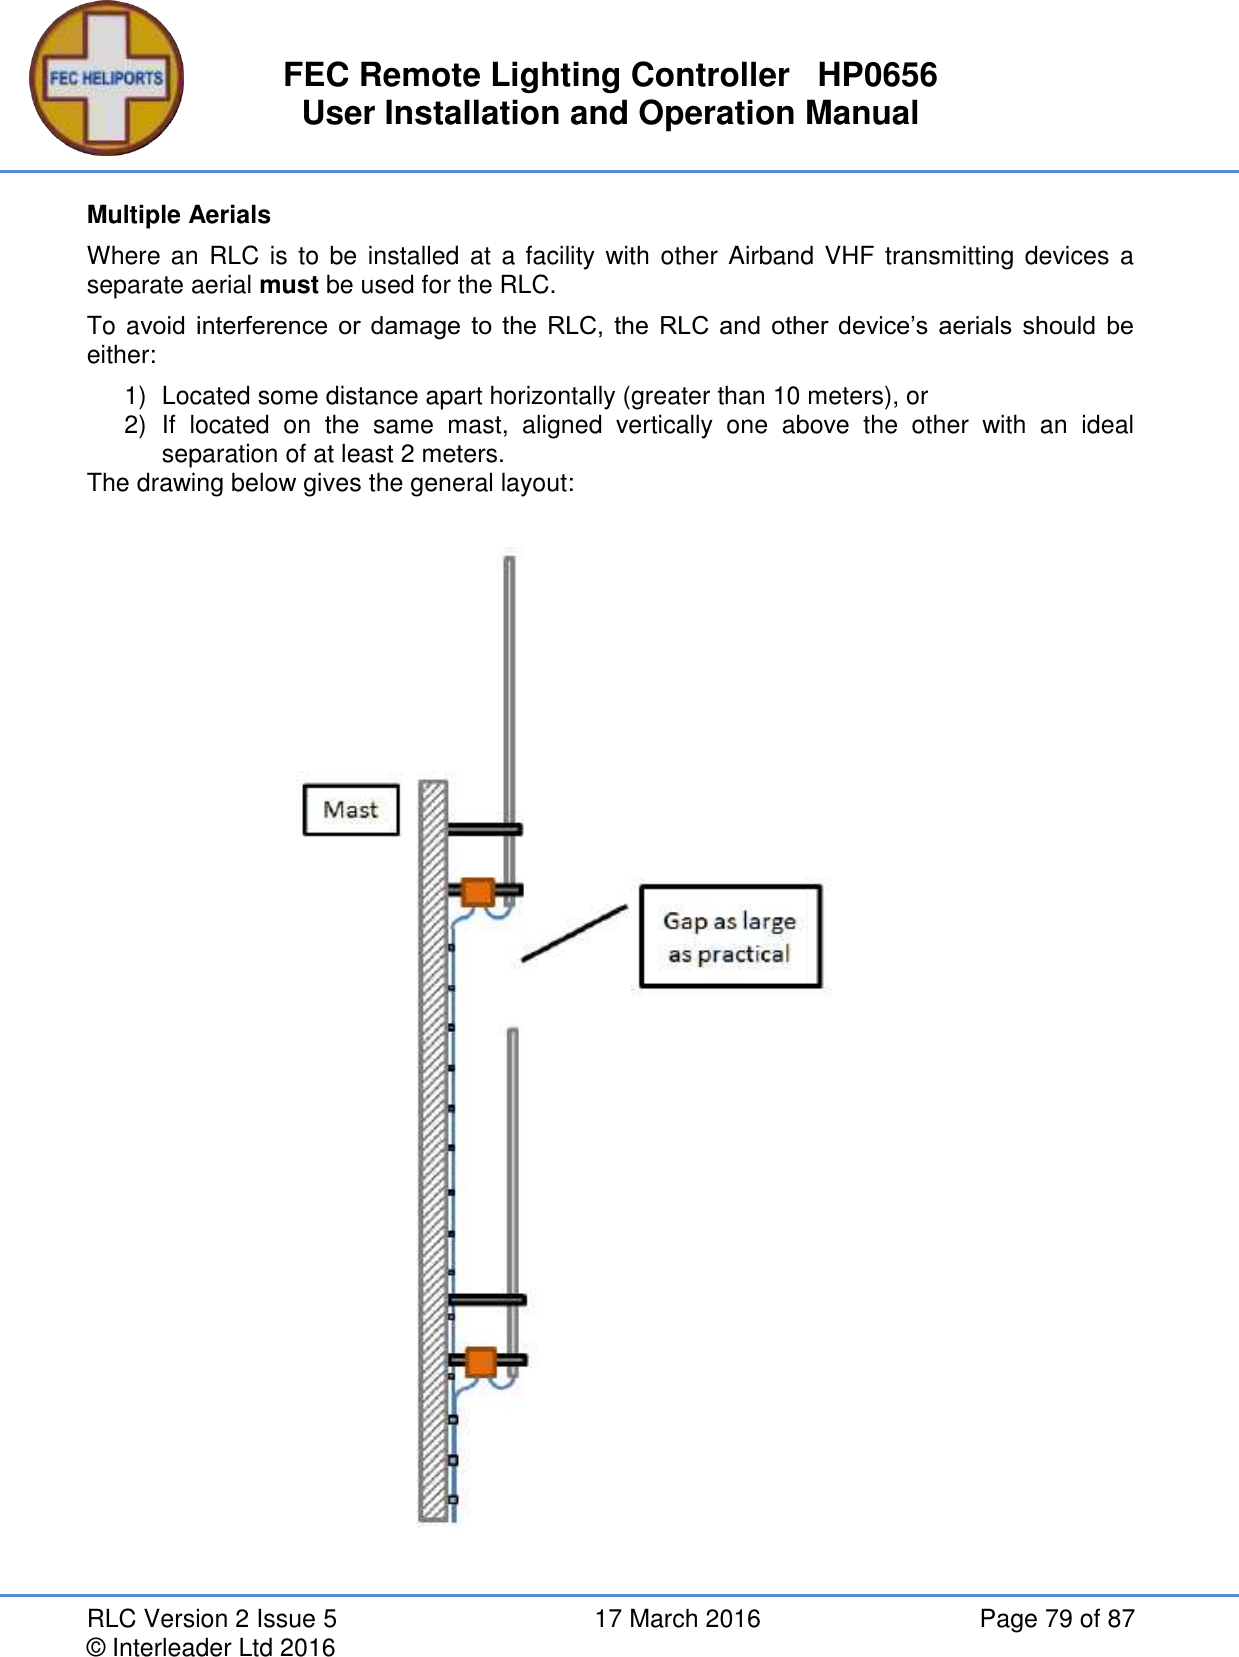 FEC Remote Lighting Controller   HP0656 User Installation and Operation Manual RLC Version 2 Issue 5  17 March 2016  Page 79 of 87 © Interleader Ltd 2016 Multiple Aerials Where an RLC is  to be  installed at a facility with other Airband VHF  transmitting devices a separate aerial must be used for the RLC. To avoid  interference  or  damage  to  the  RLC,  the  RLC  and  other device’s aerials should  be either: 1)  Located some distance apart horizontally (greater than 10 meters), or 2)  If  located  on  the  same  mast,  aligned  vertically  one  above  the  other  with  an  ideal separation of at least 2 meters. The drawing below gives the general layout:    